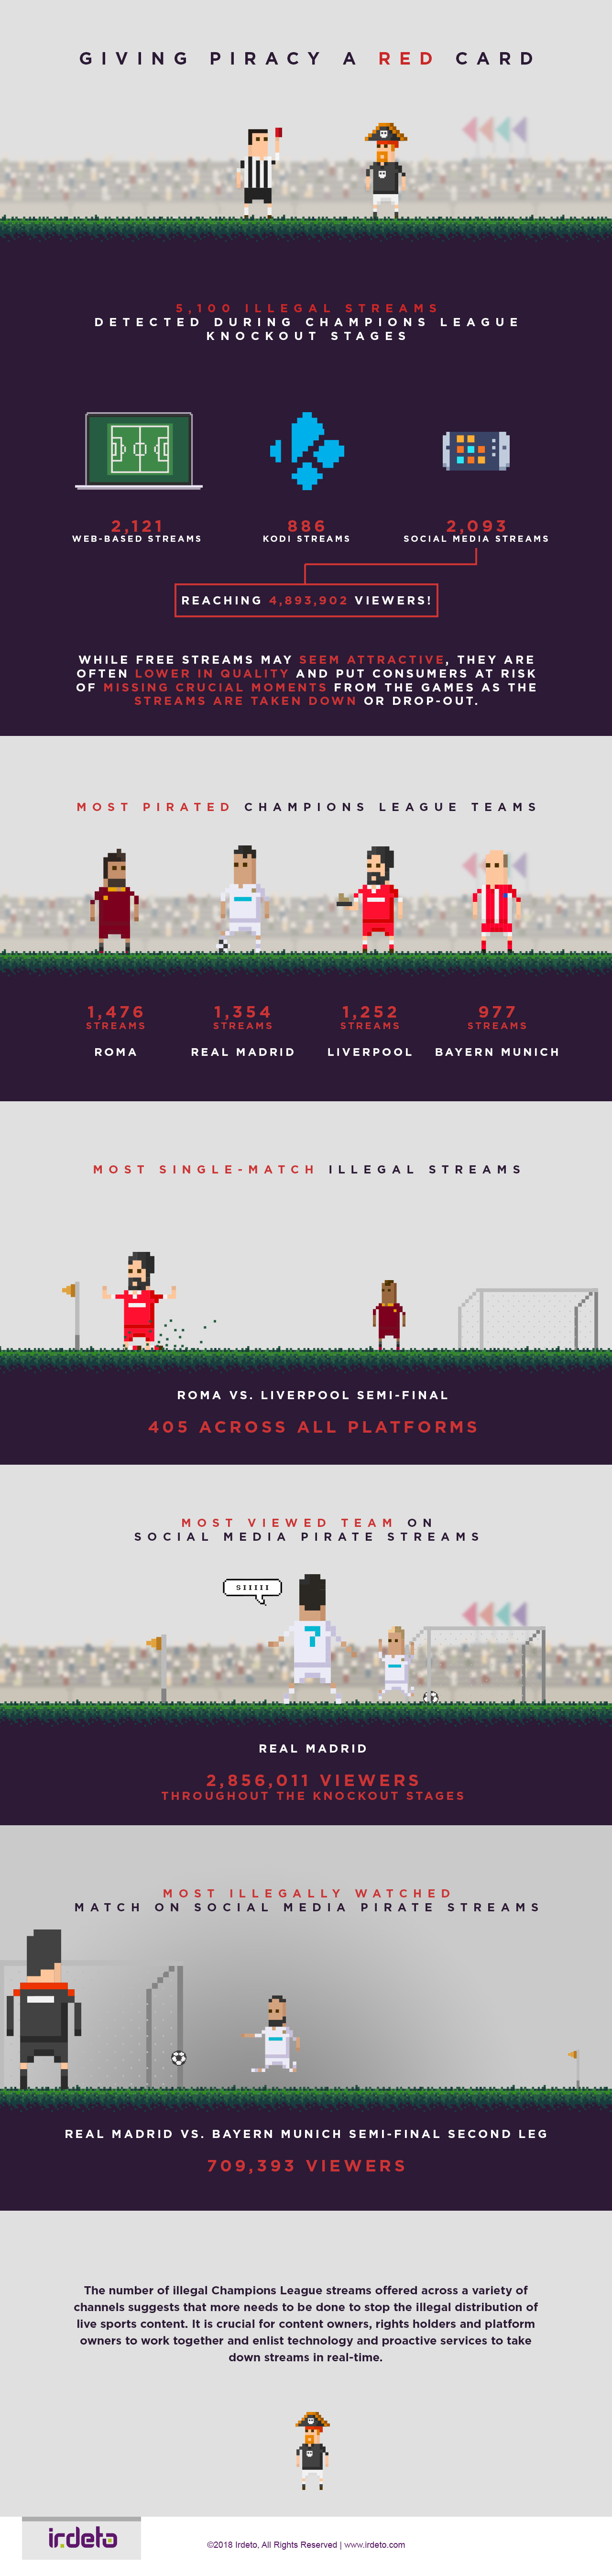 Infographic: Giving piracy a red card